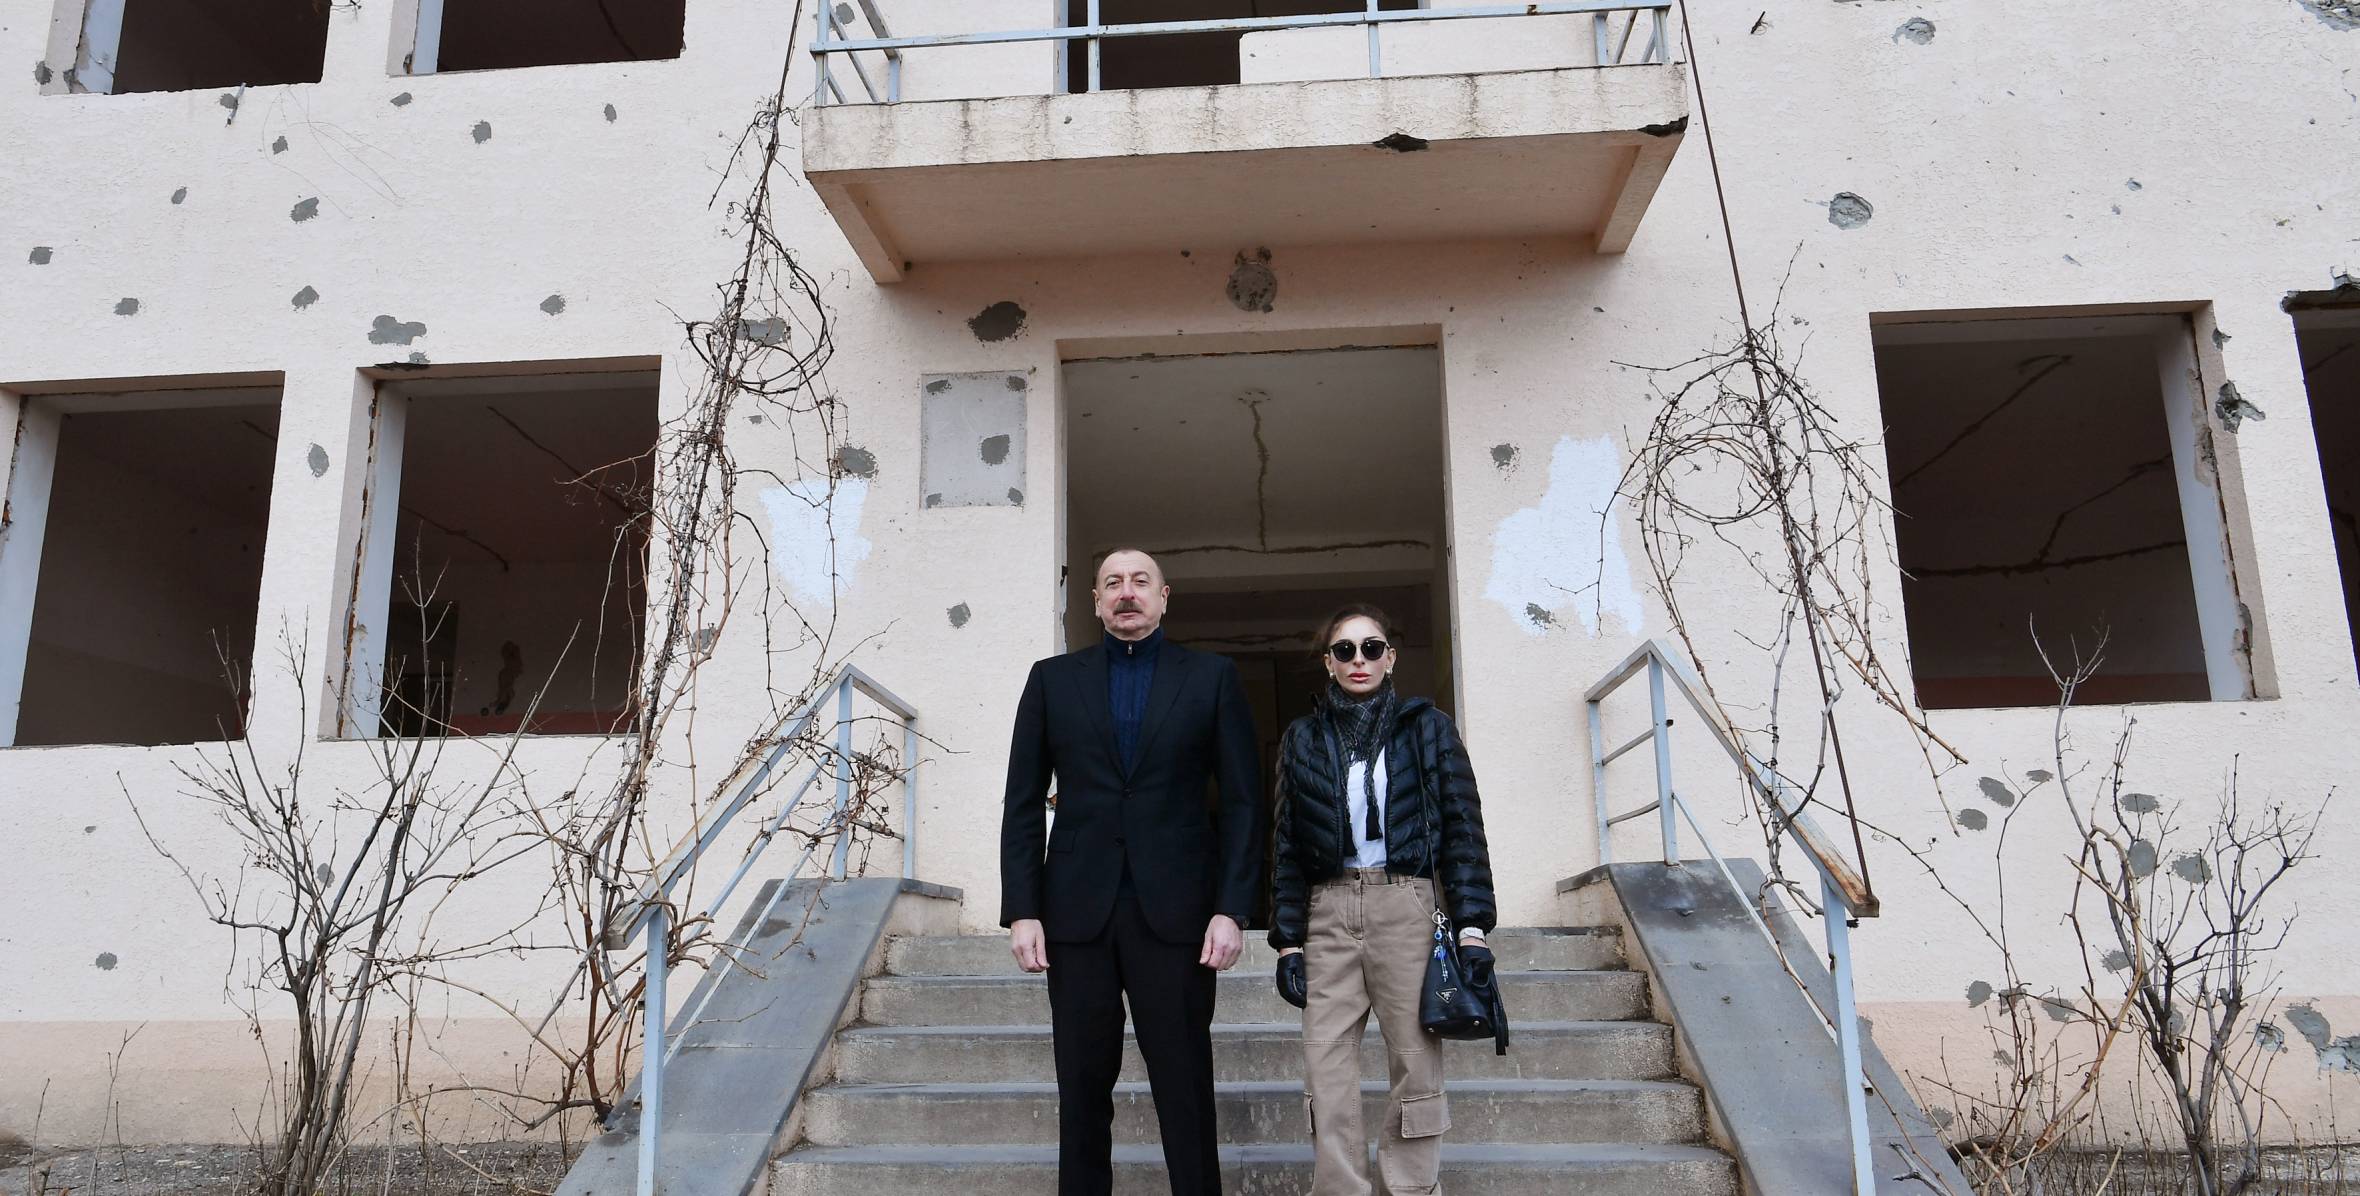 Ilham Aliyev and First Lady Mehriban Aliyeva have visited the 144-seat secondary school building there and enquired about the state of the school